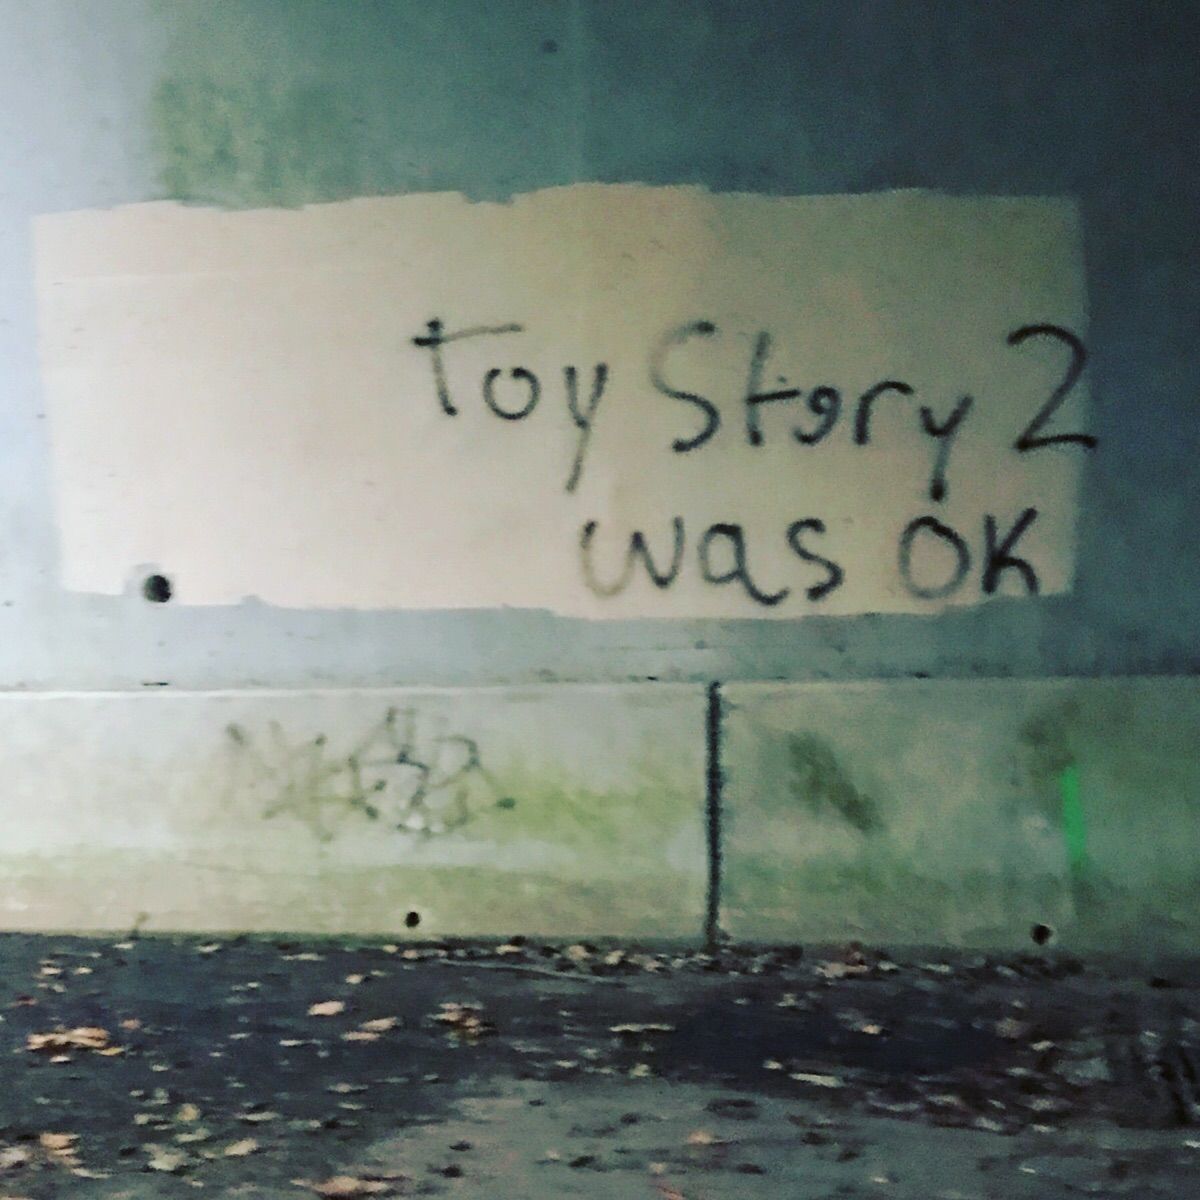 Found under a bridge near my house, this might be my favorite graffiti of all time